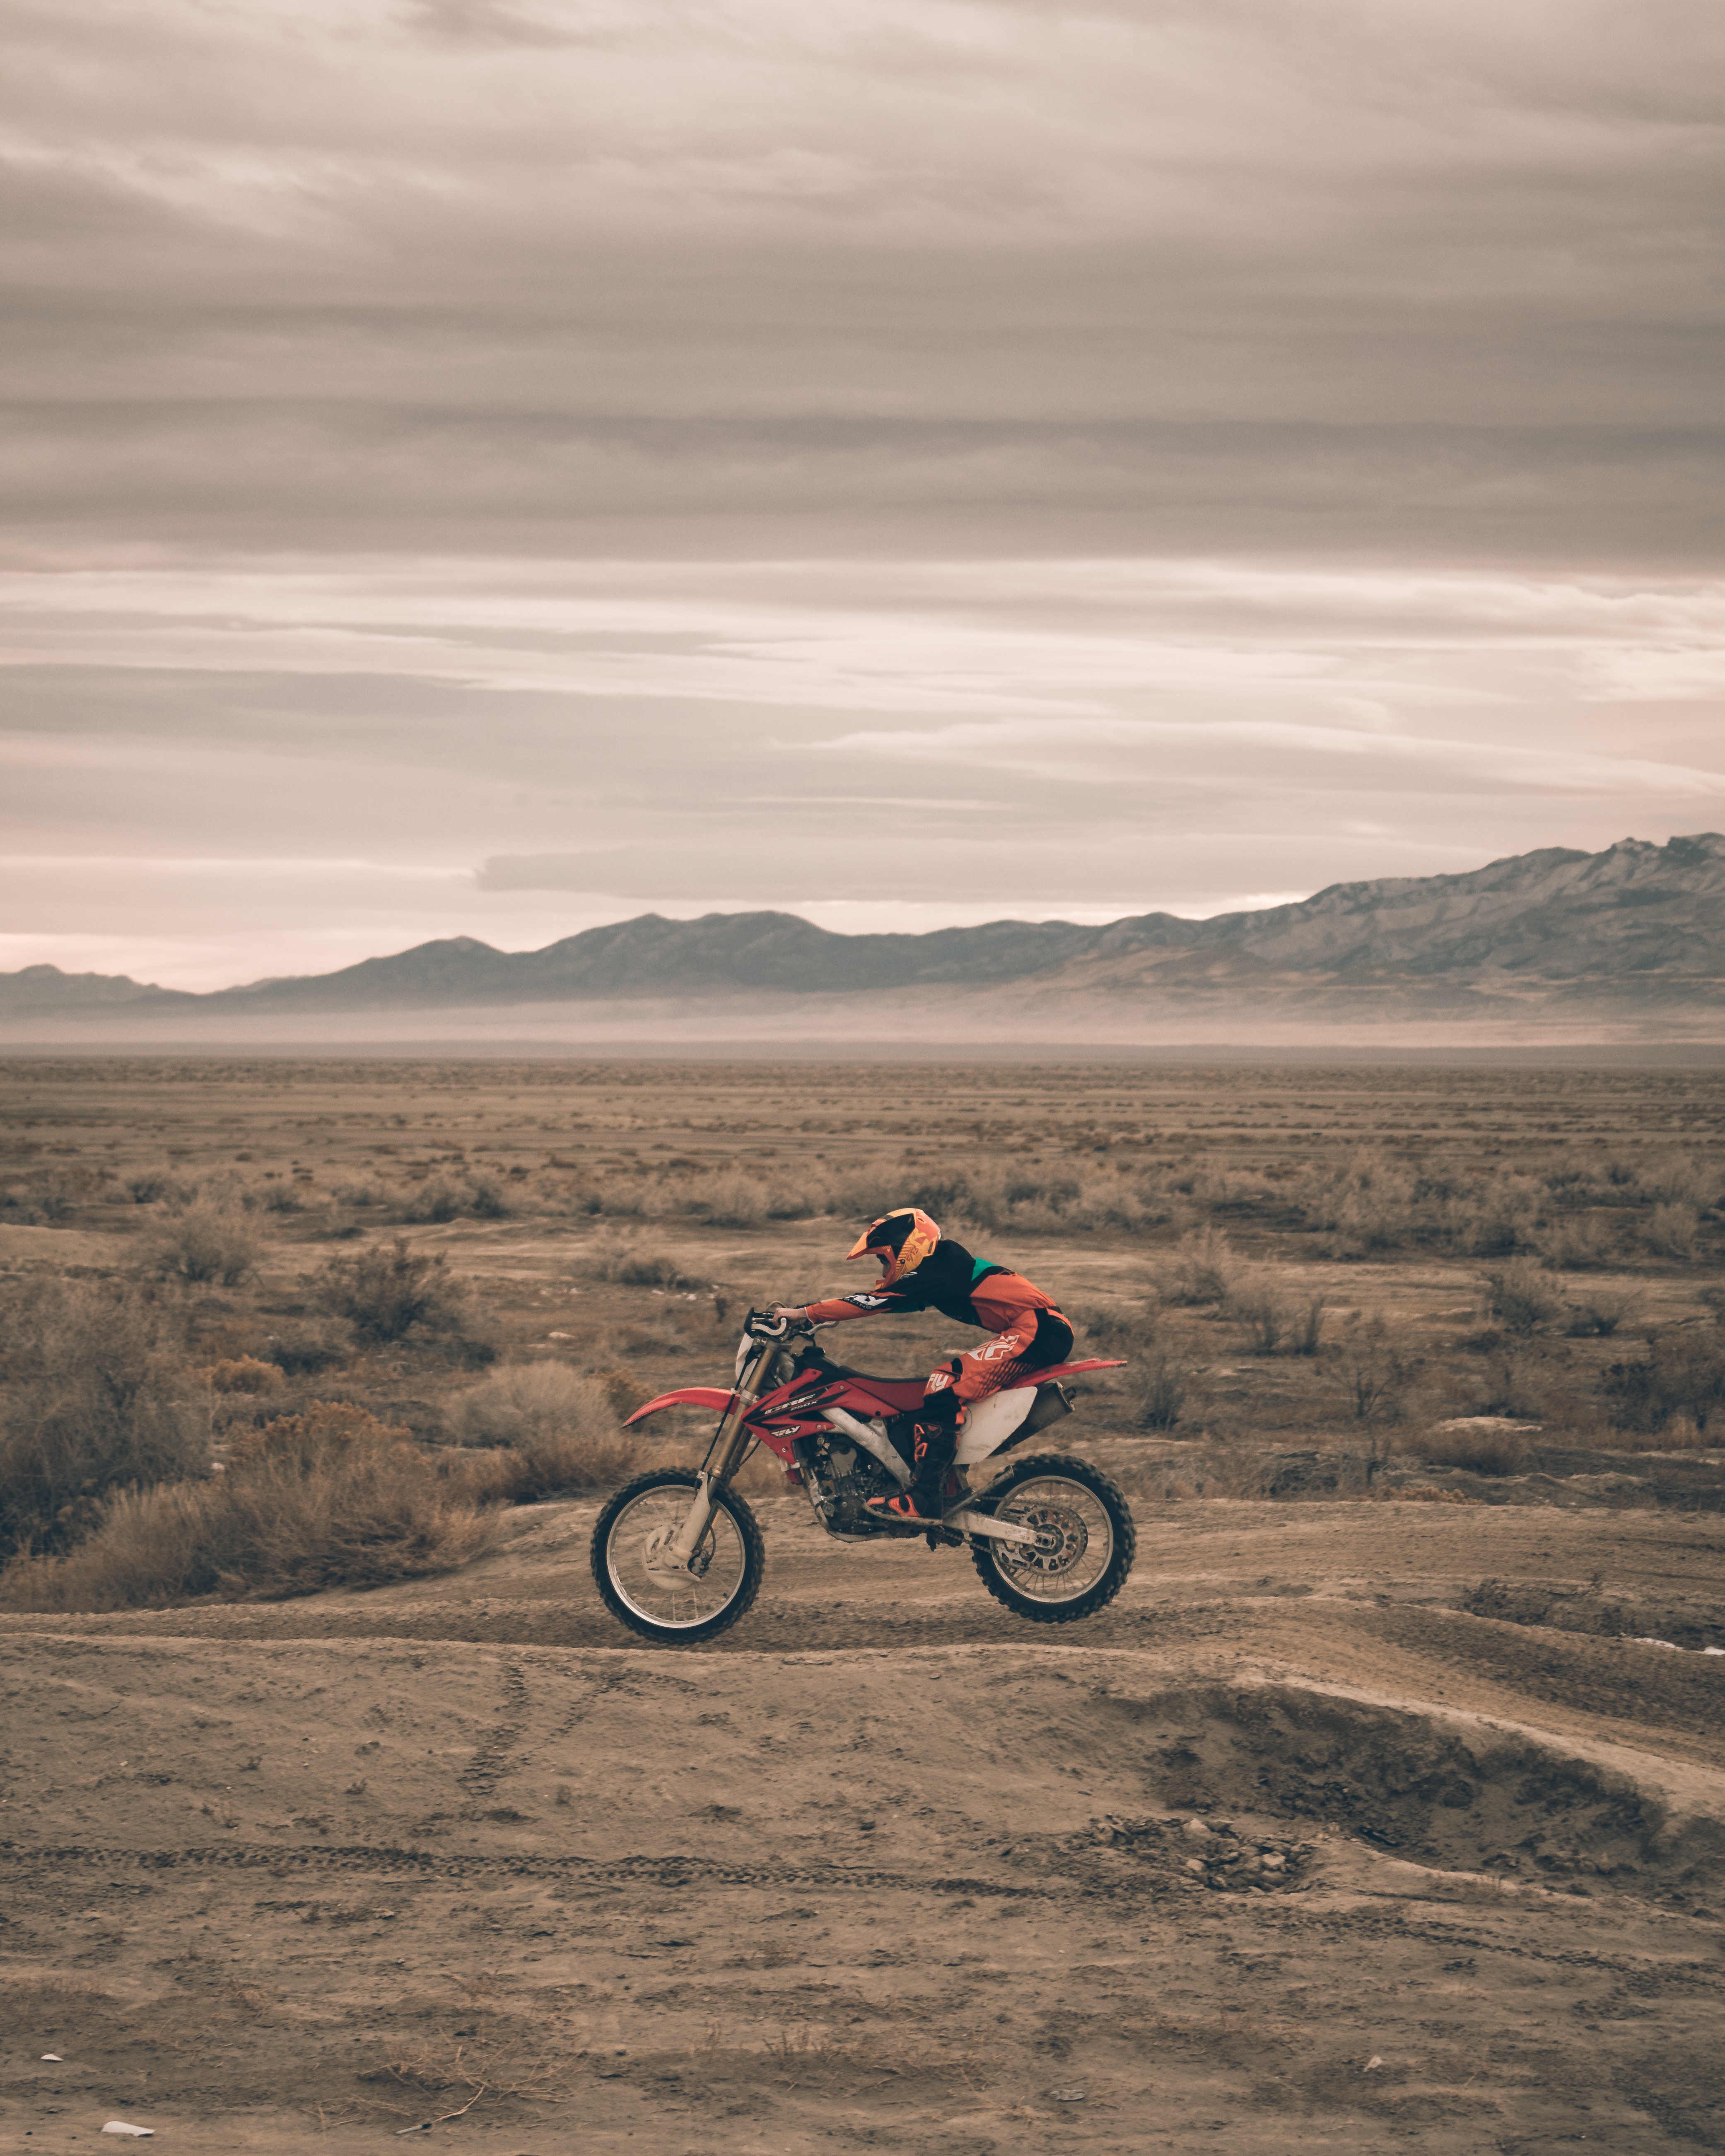 sand, motorcycles, motorcyclist, motorcycling